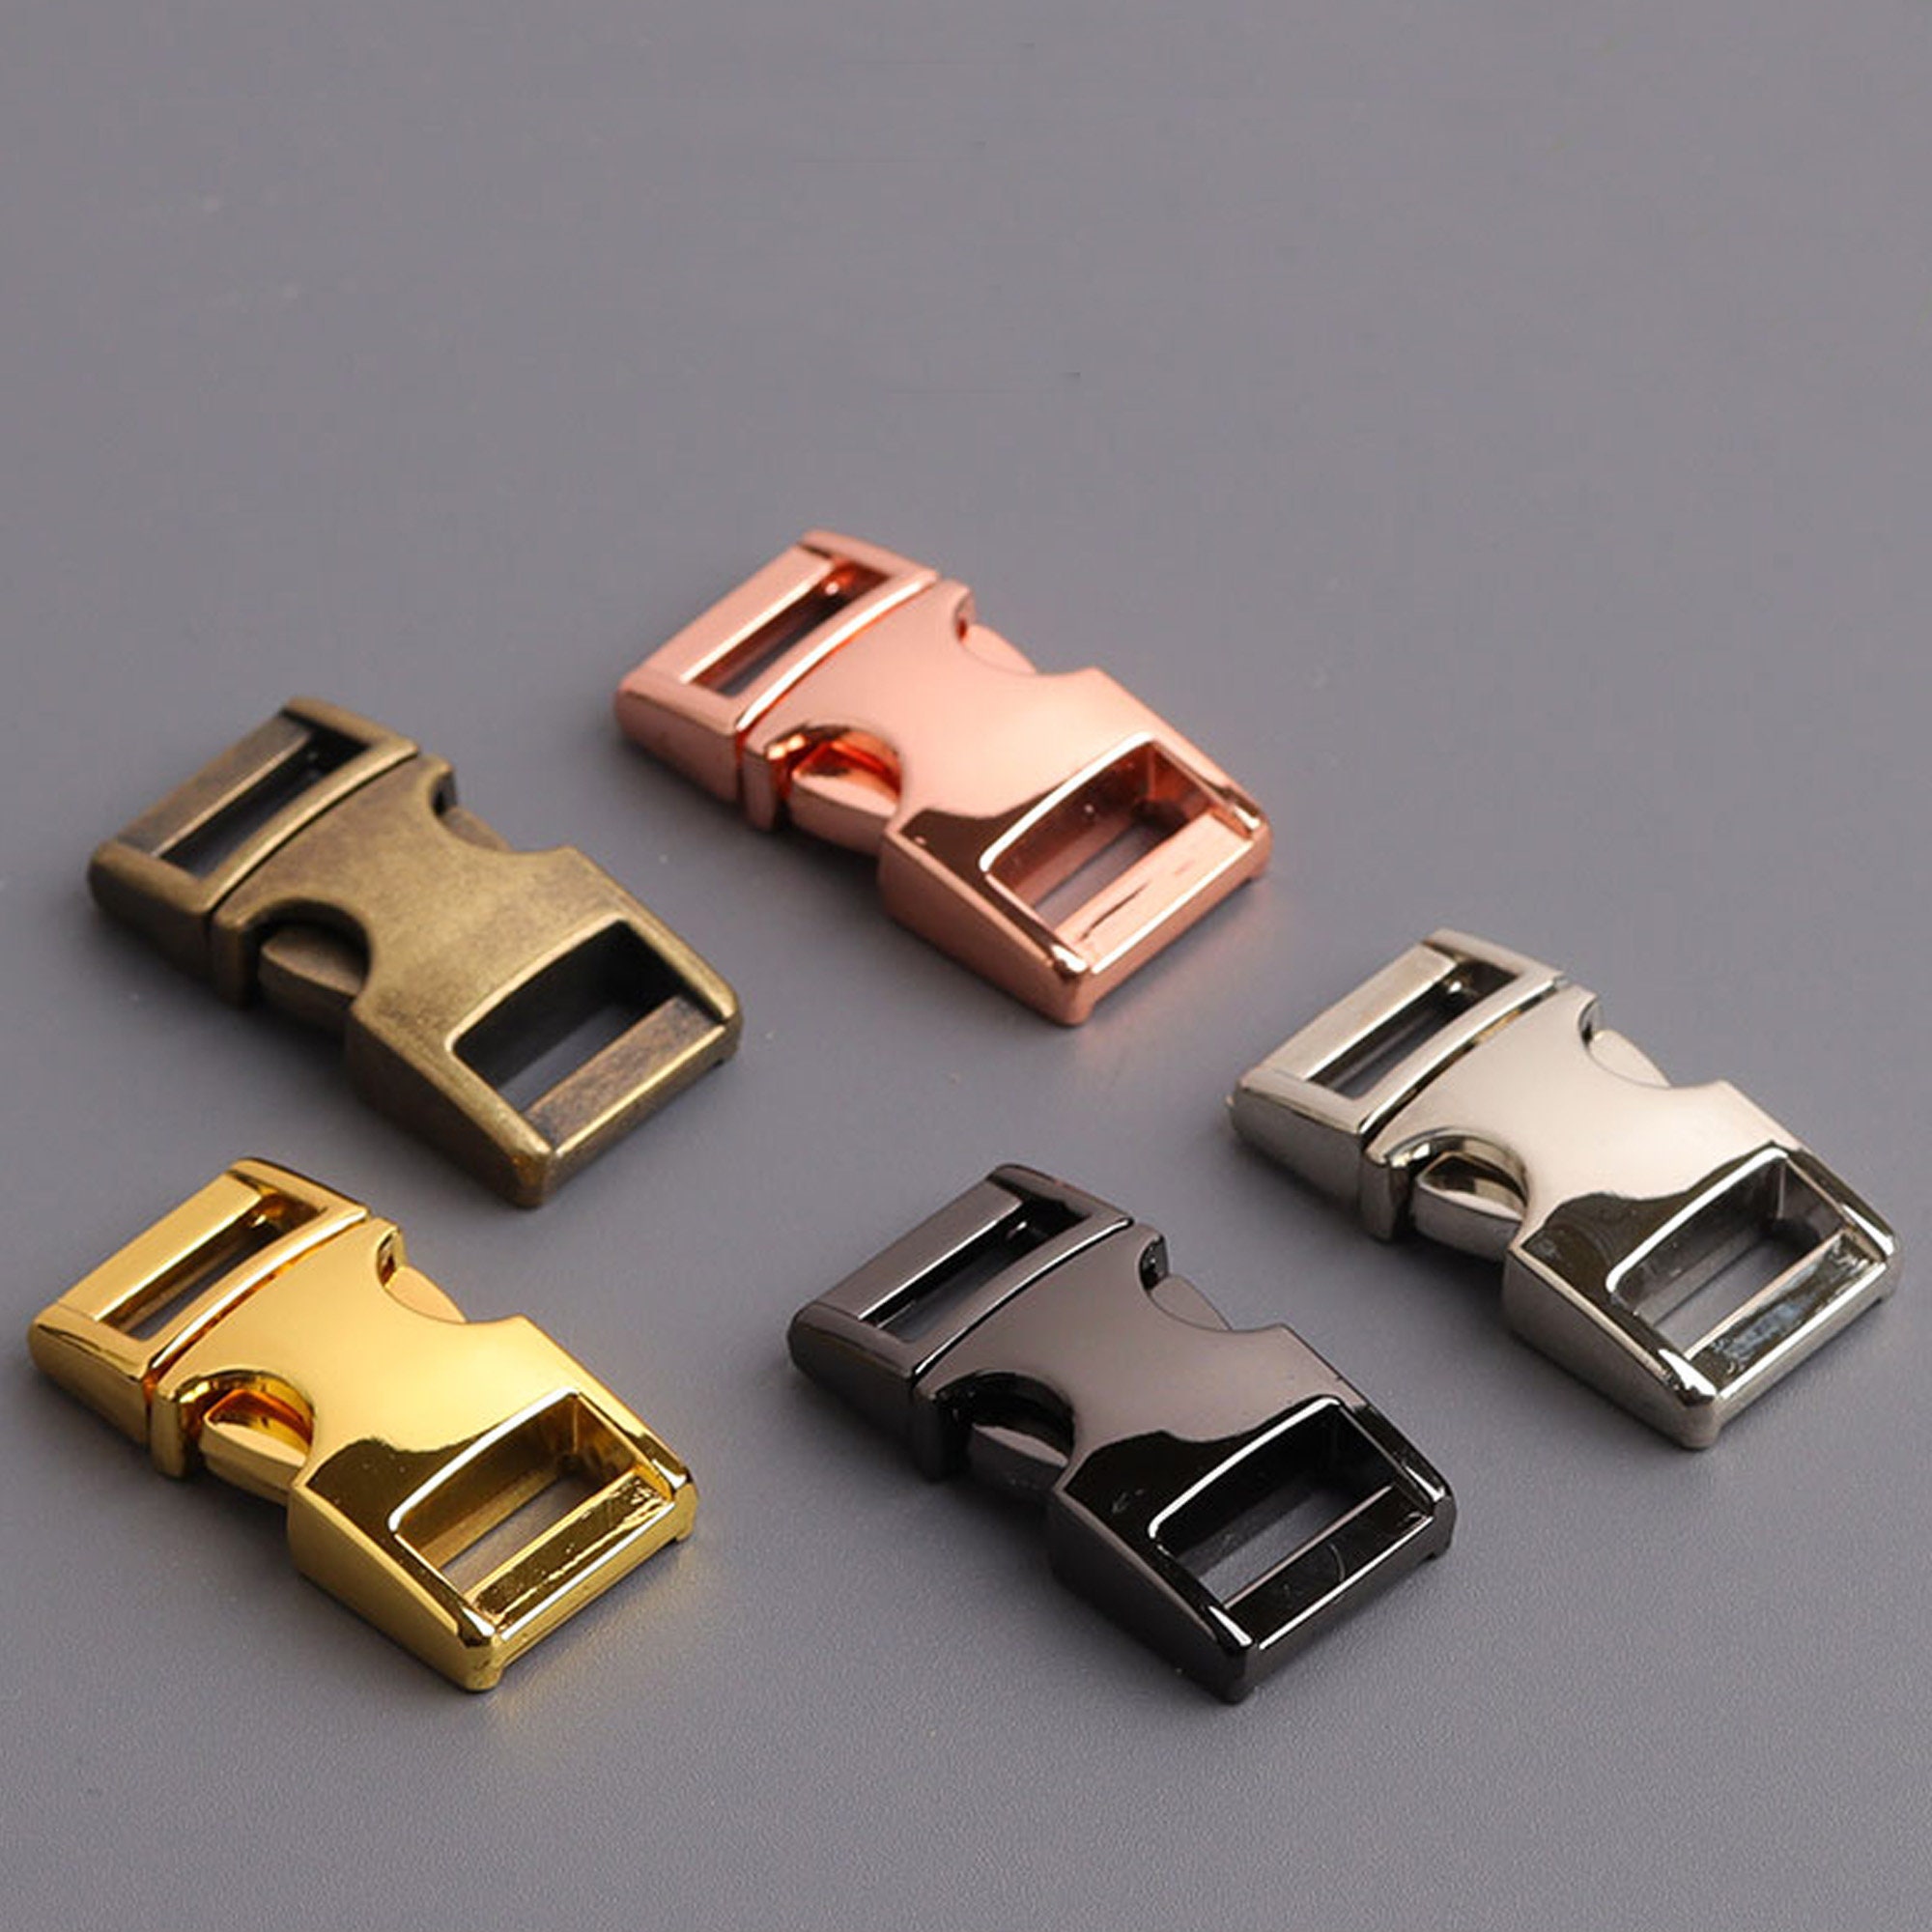 1 3/4 in Plastic Side Release Buckle. Hard to Find Buckle Size for